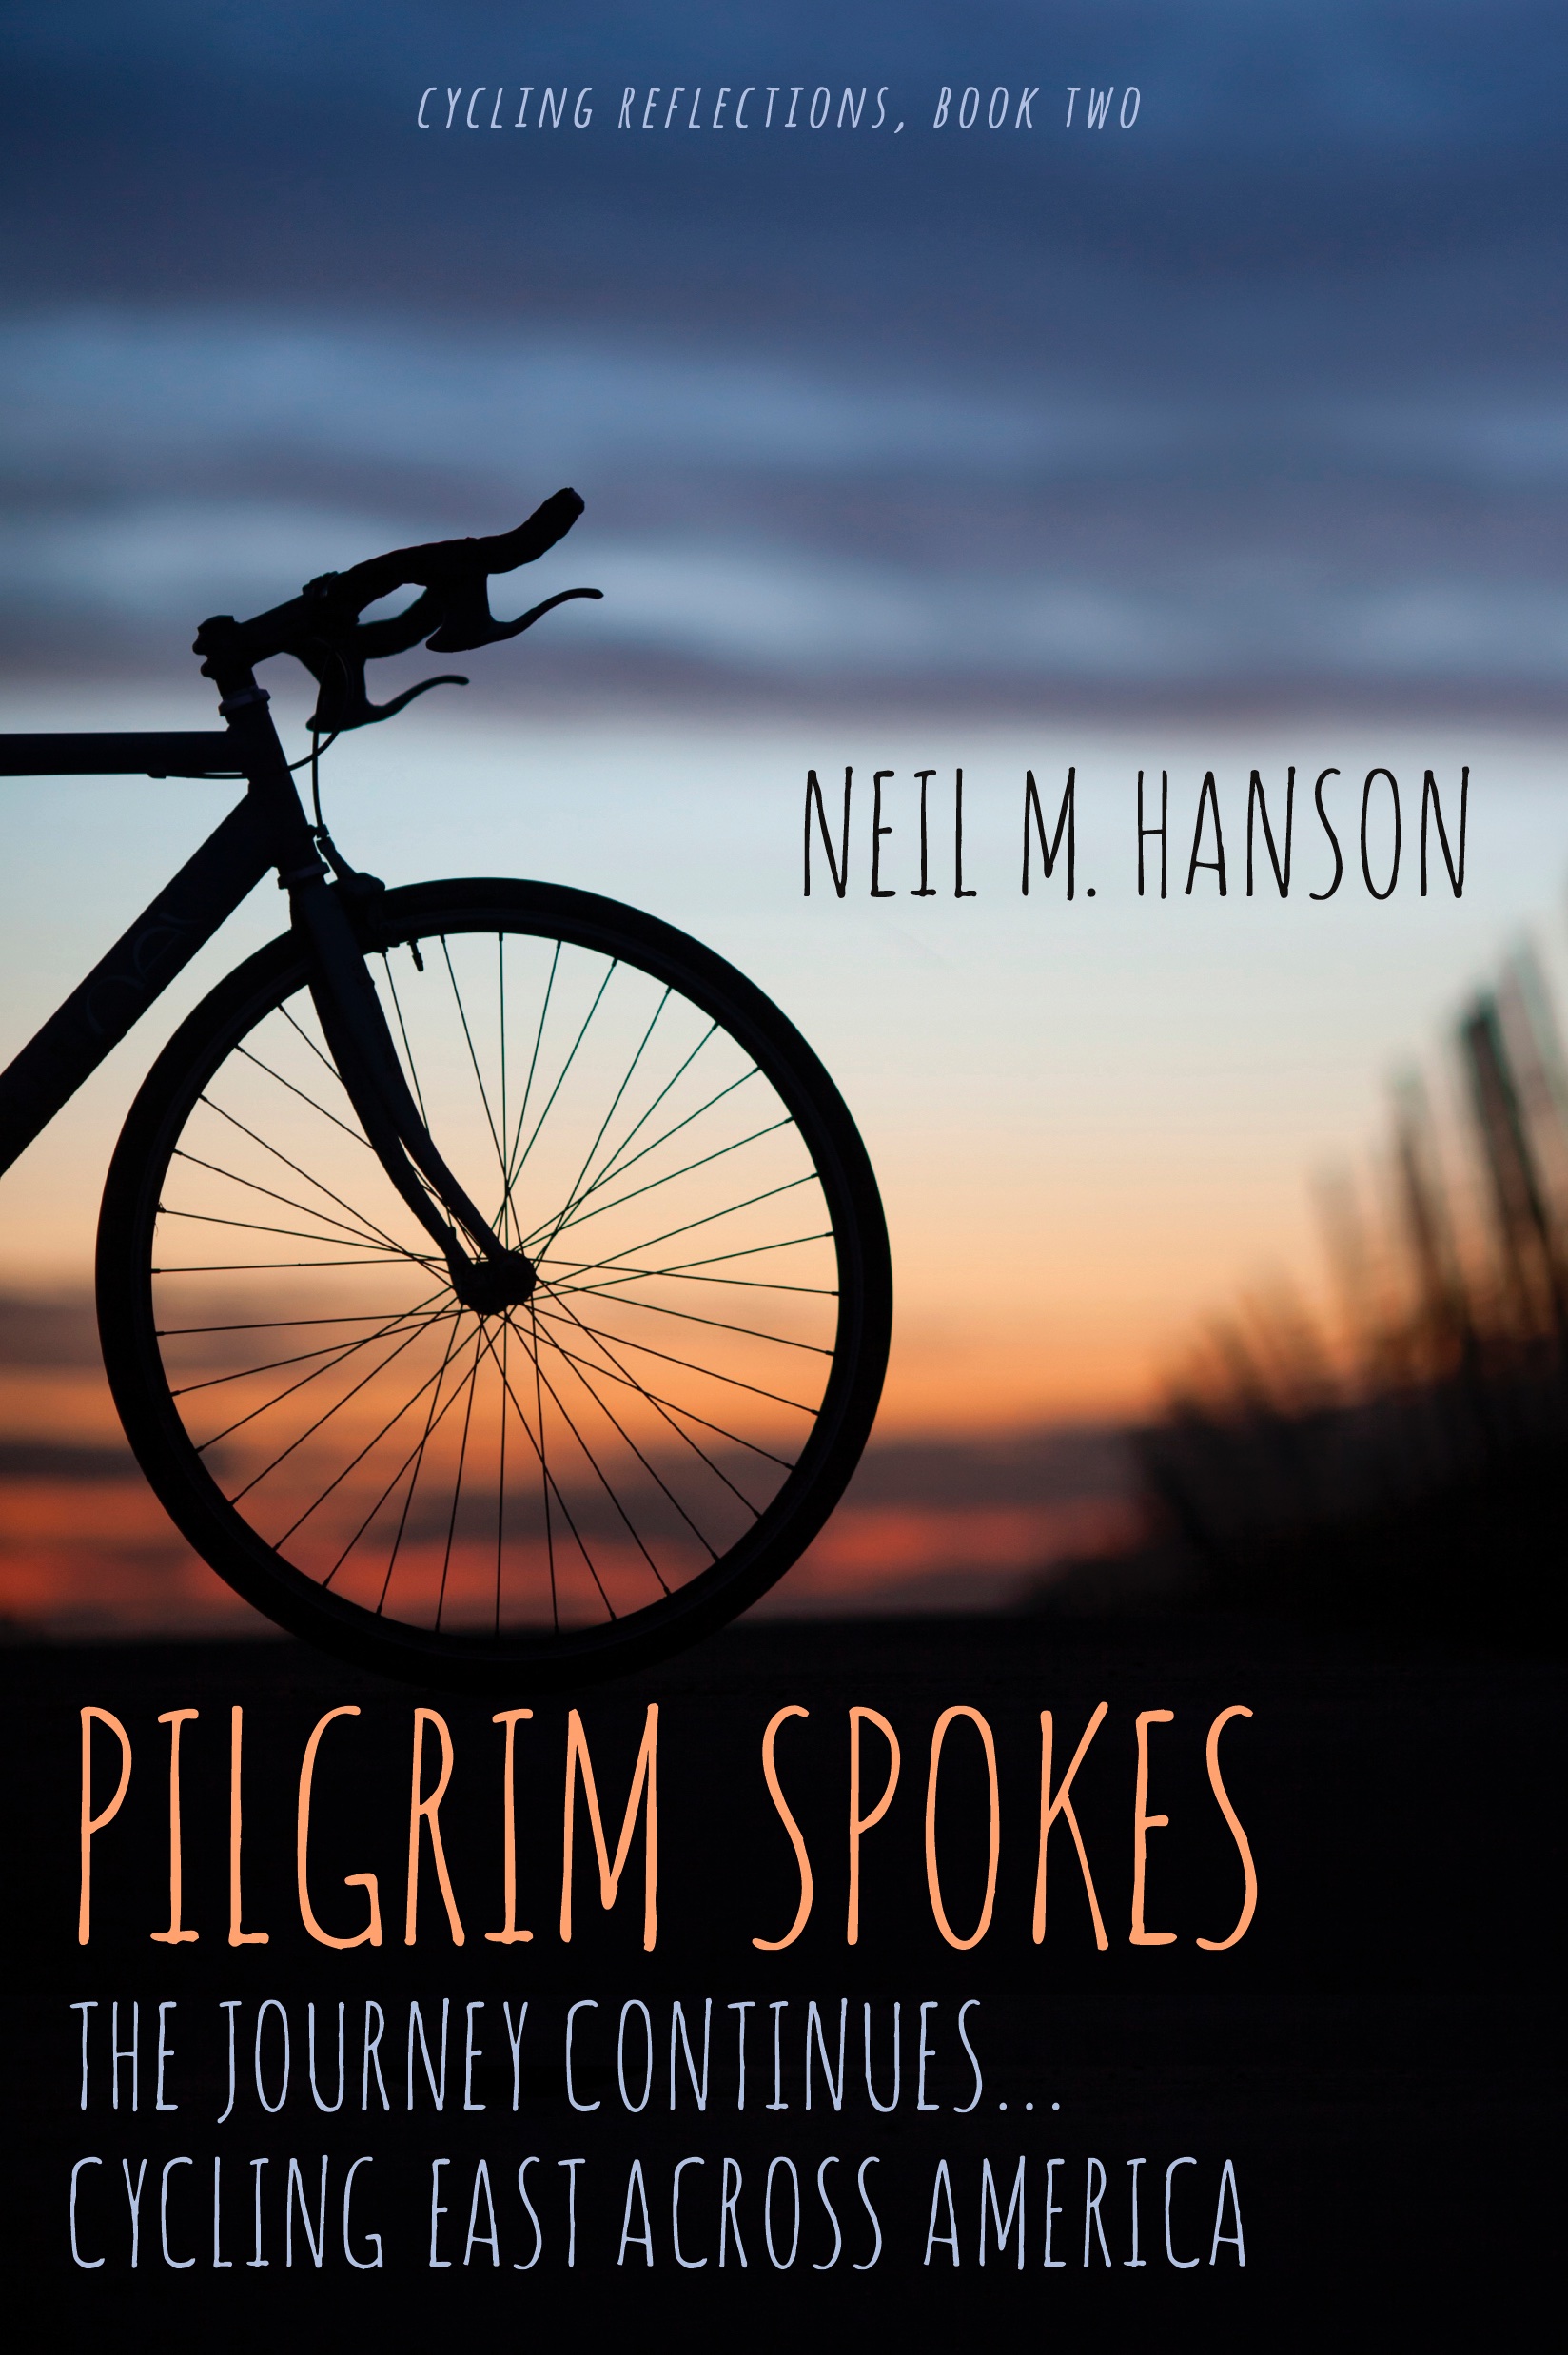 Pilgrim Spokes First Release Today